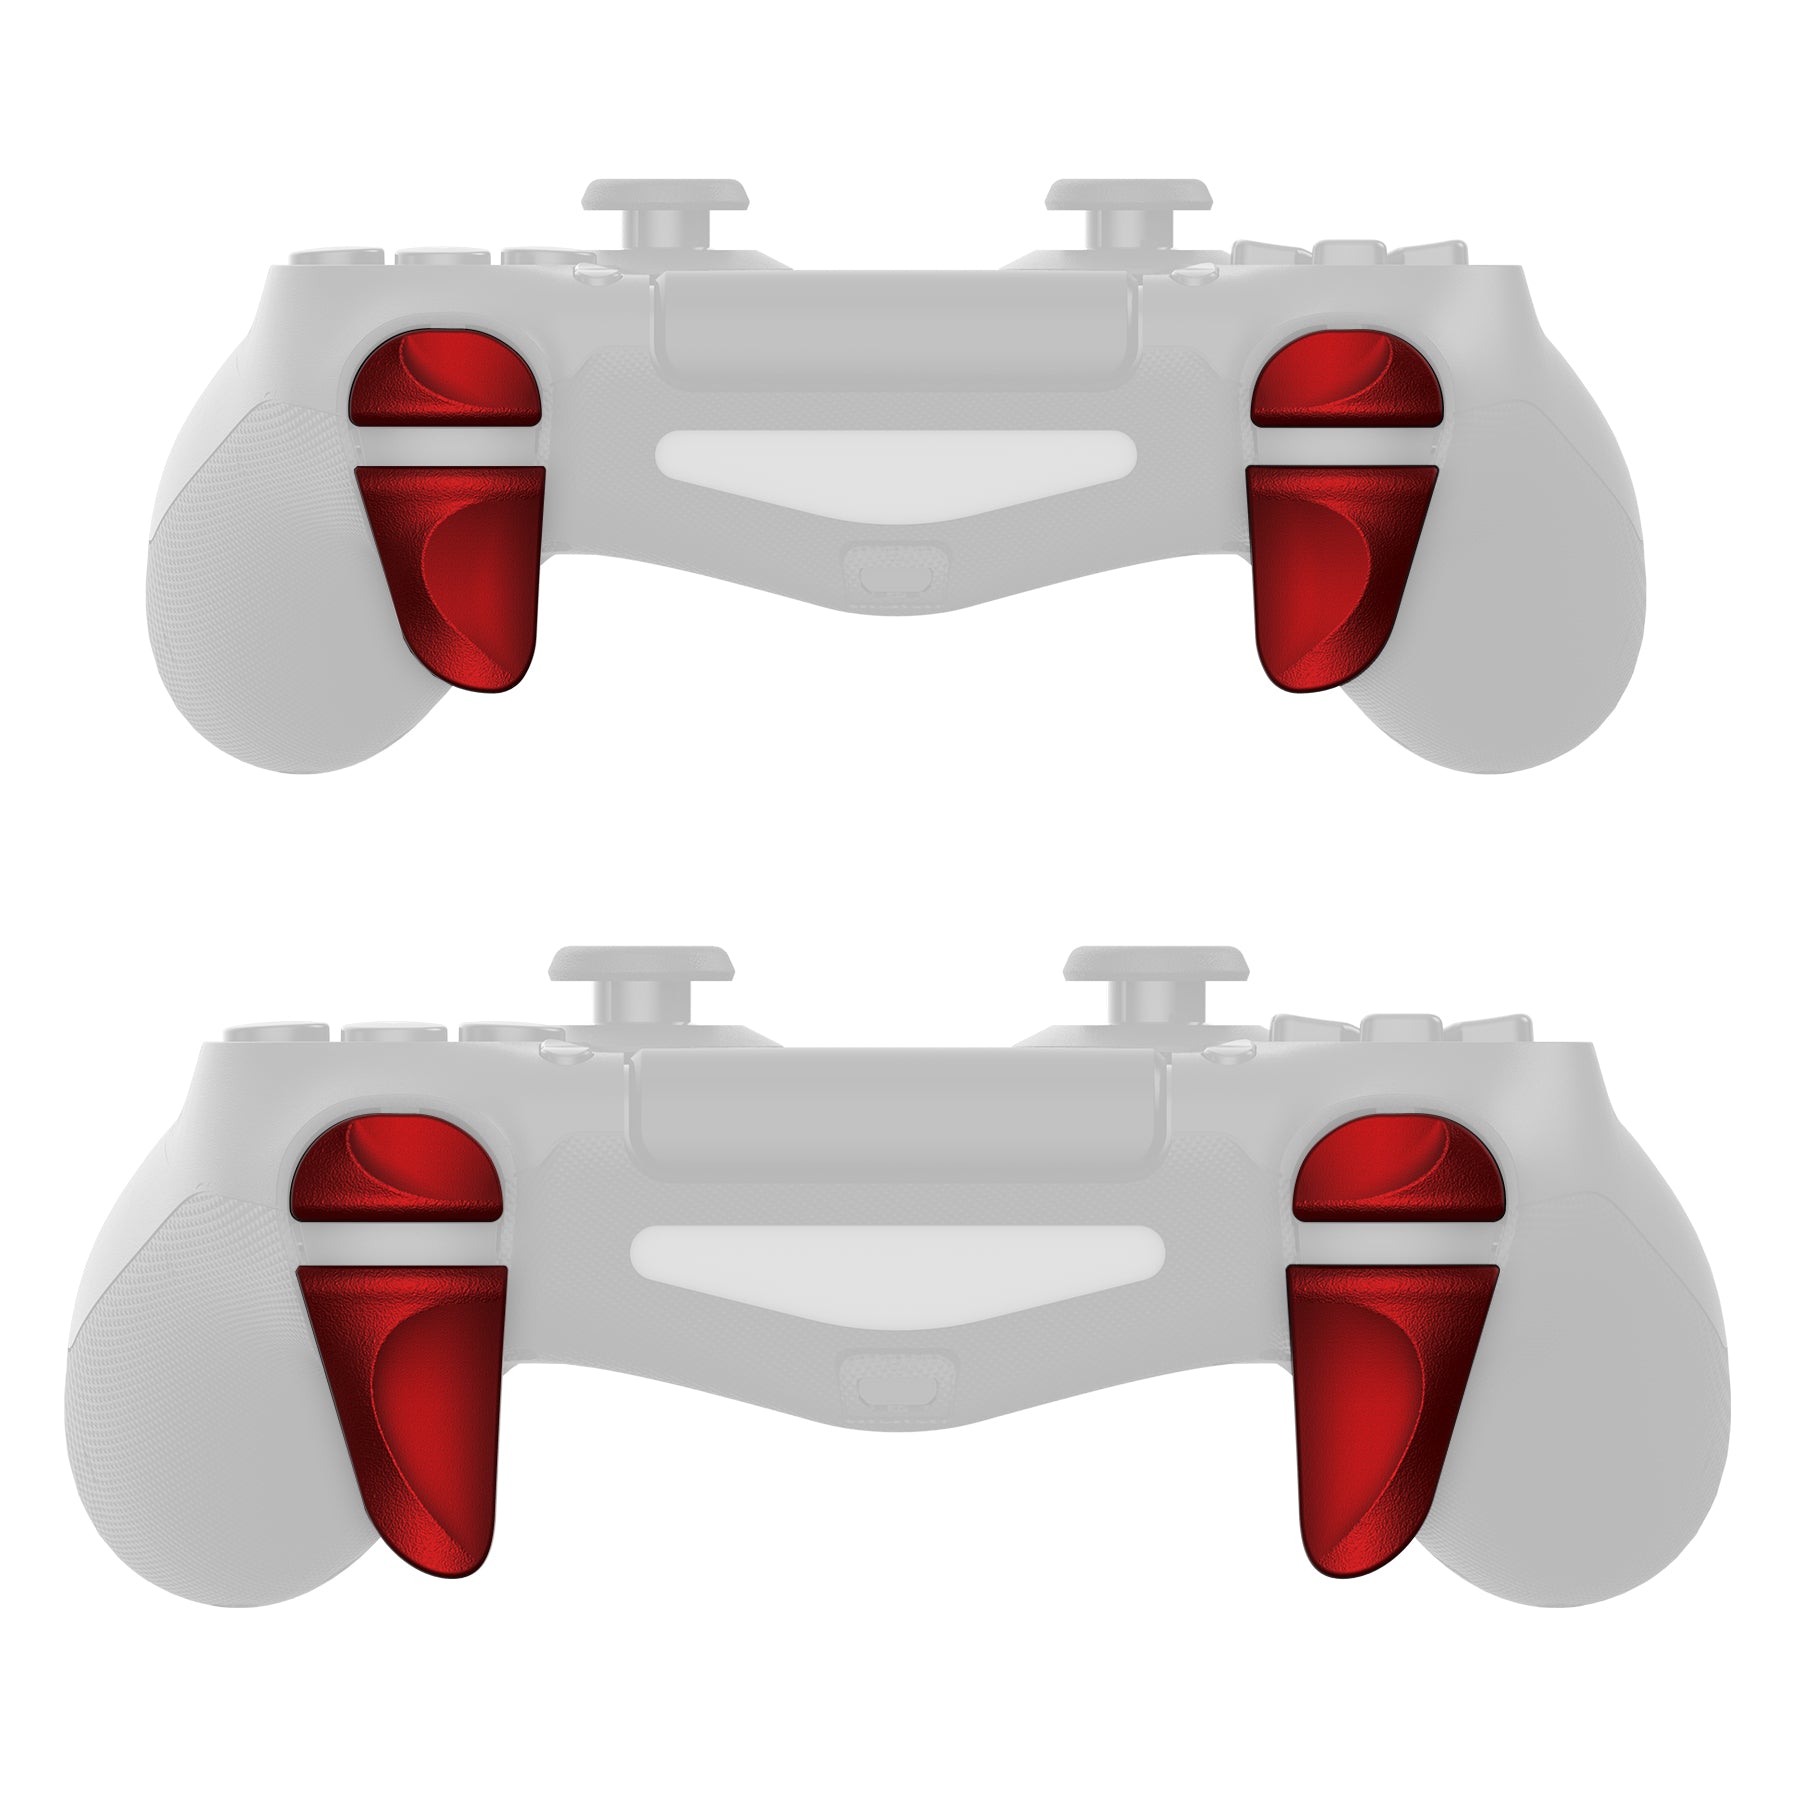 PlayVital 2 Pair Shoulder Buttons Extension Triggers for PS4 All Model Controller, Game Improvement Adjusters for PS4 Controller, Bumper Trigger Extenders for PS4 Slim Pro Controller - Scarlet Red - P4PJ004 PlayVital